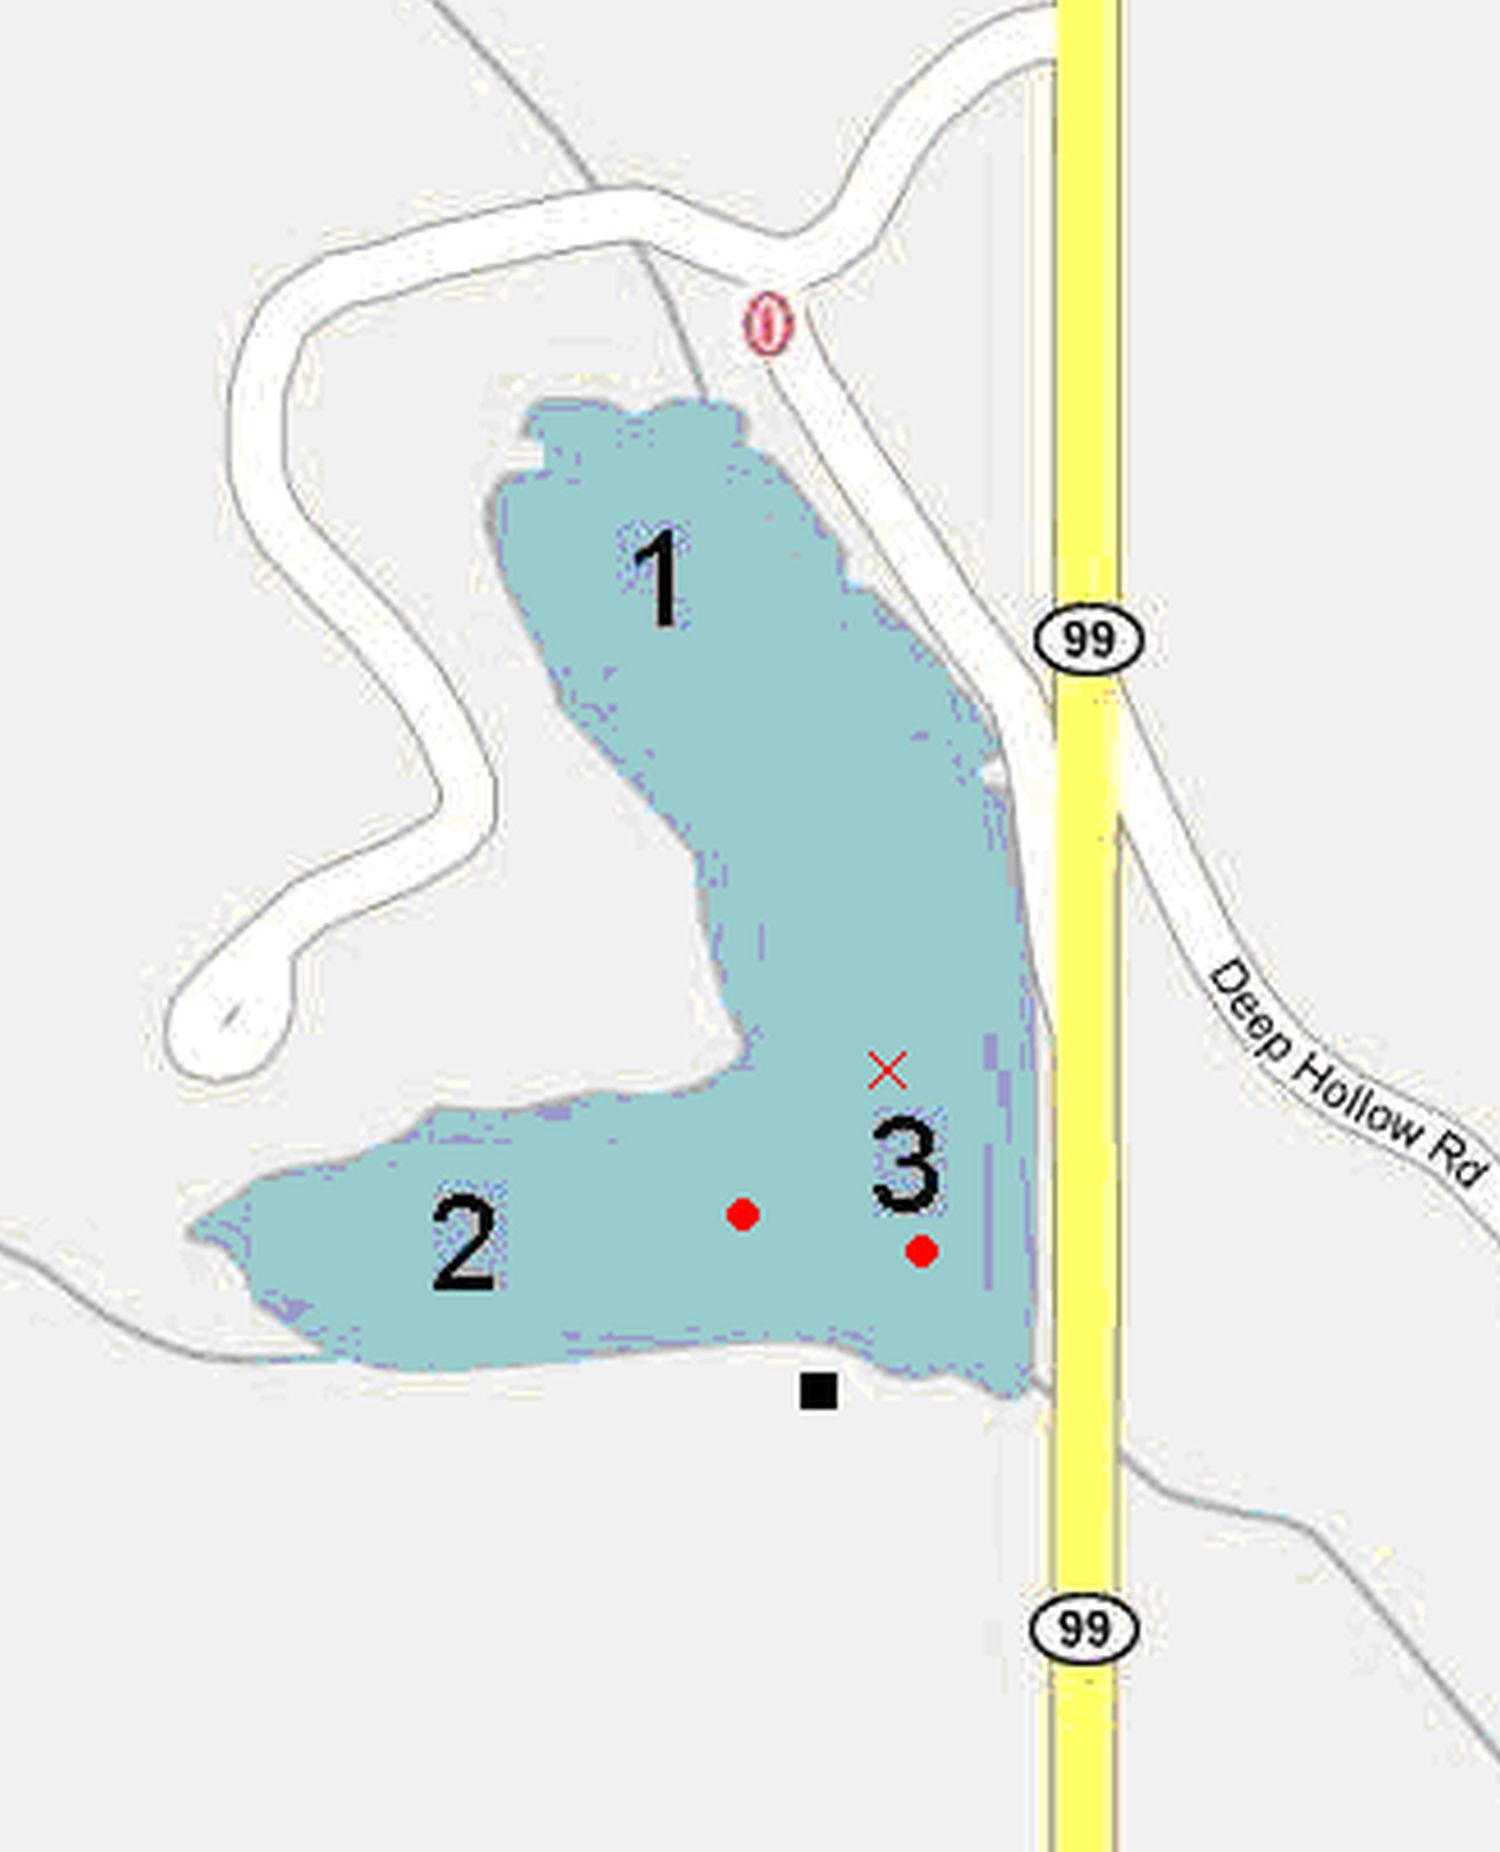 Map of Pottawatomie State Fishing Lake with sampling points (numbered) and pump outlets (functional – red dot, dysfunctional – red “x”).